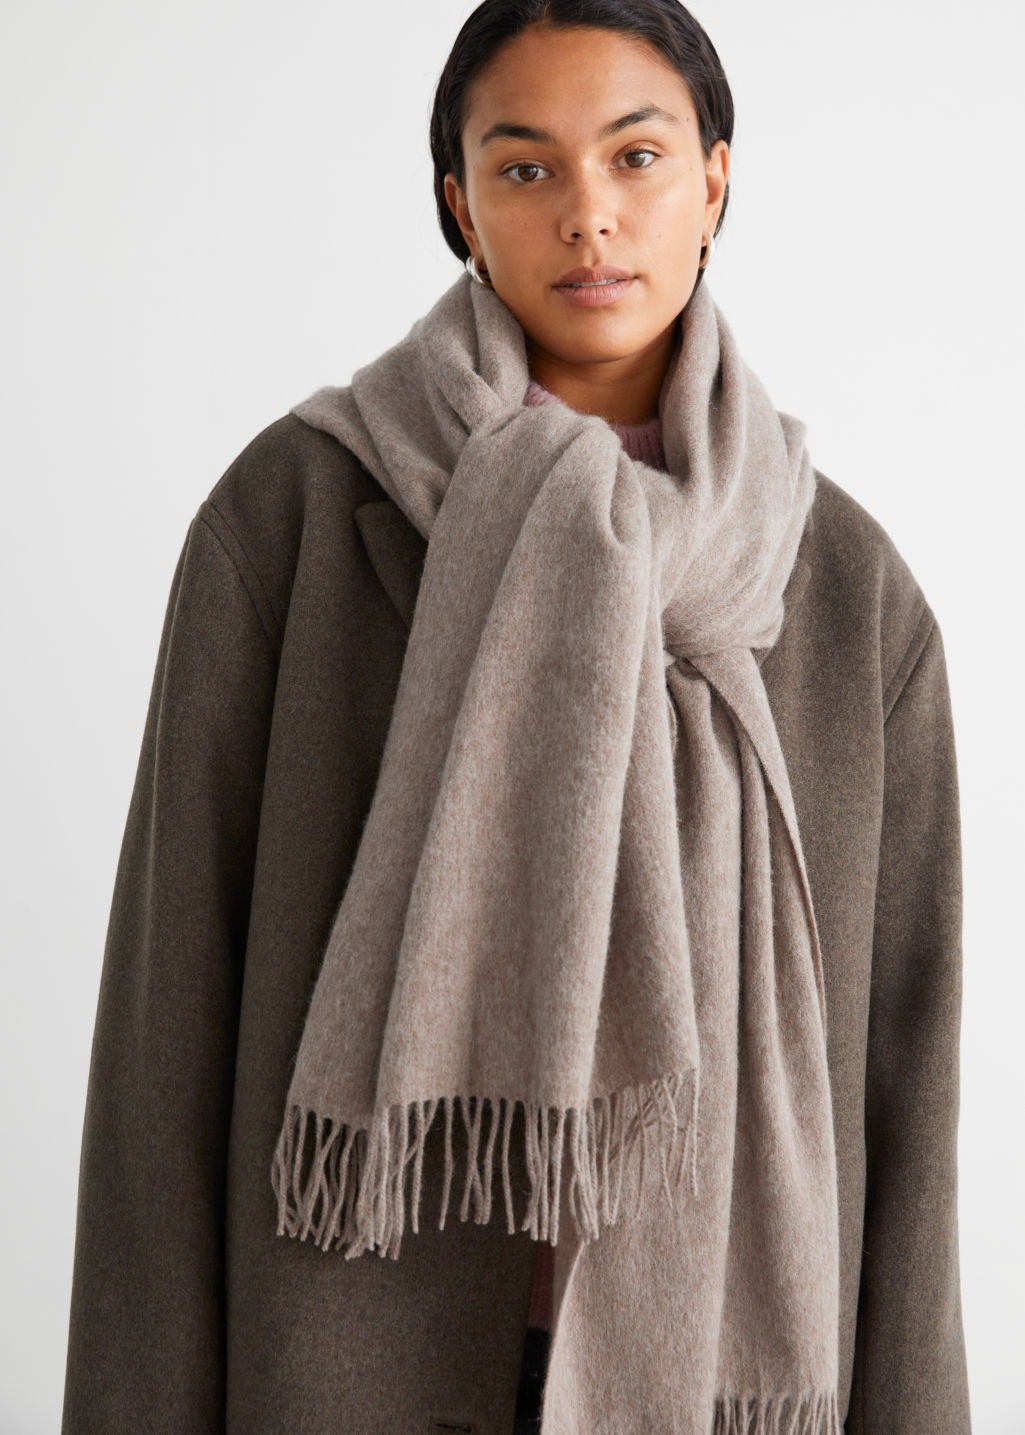 & Other Stories + Fringed Wool Blanket Scarf